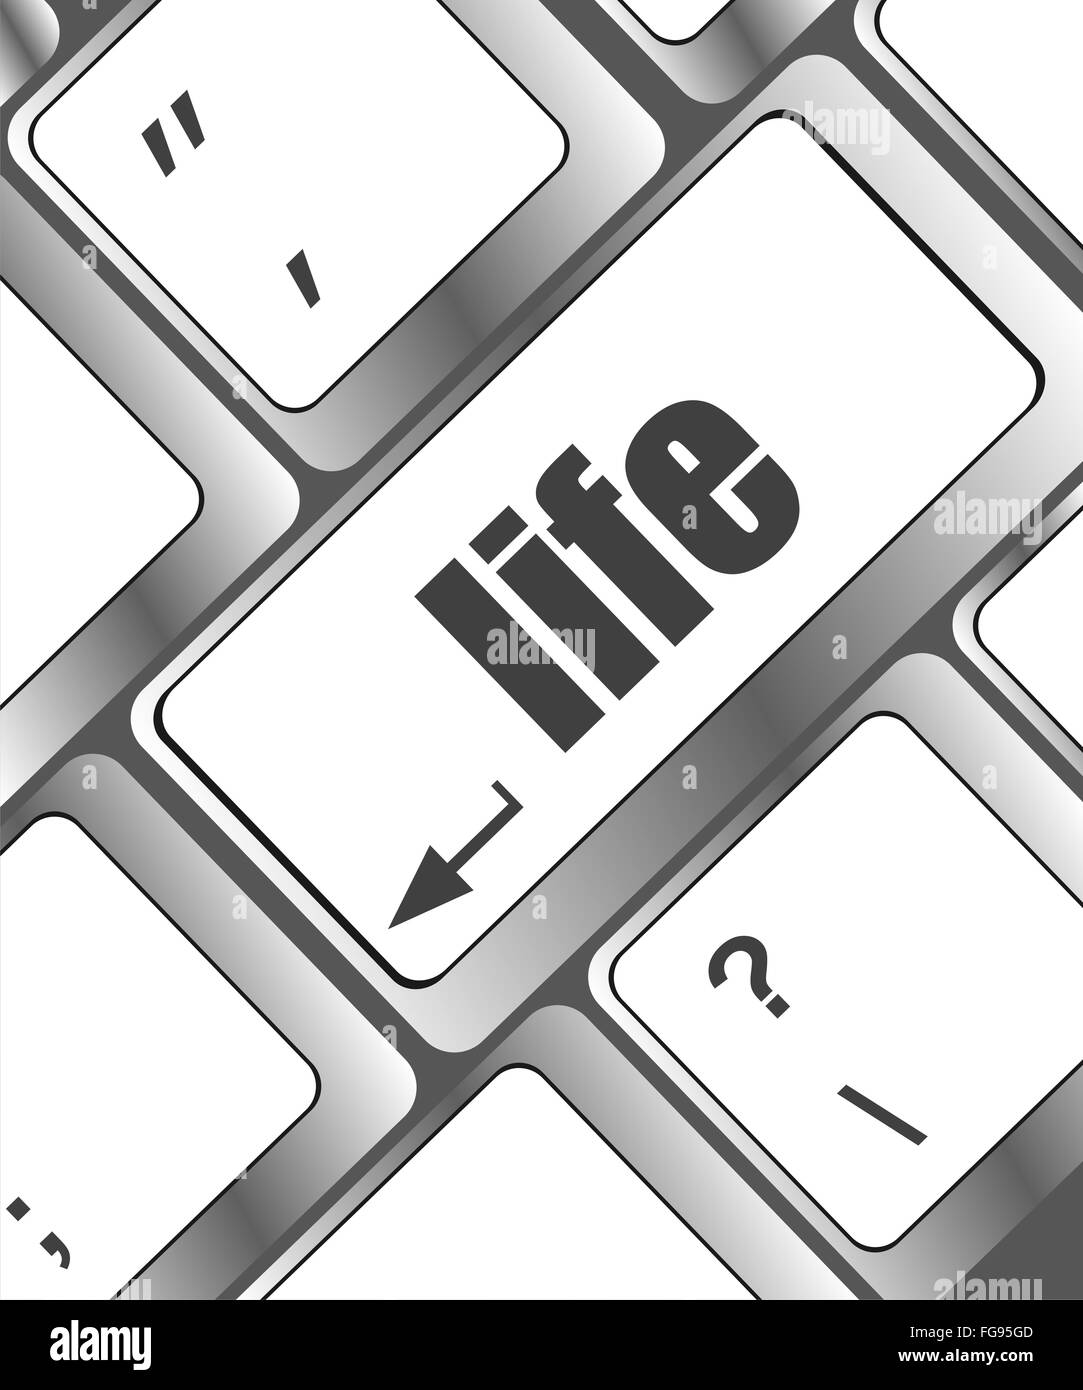 Life key in place of enter key - social concept Stock Photo